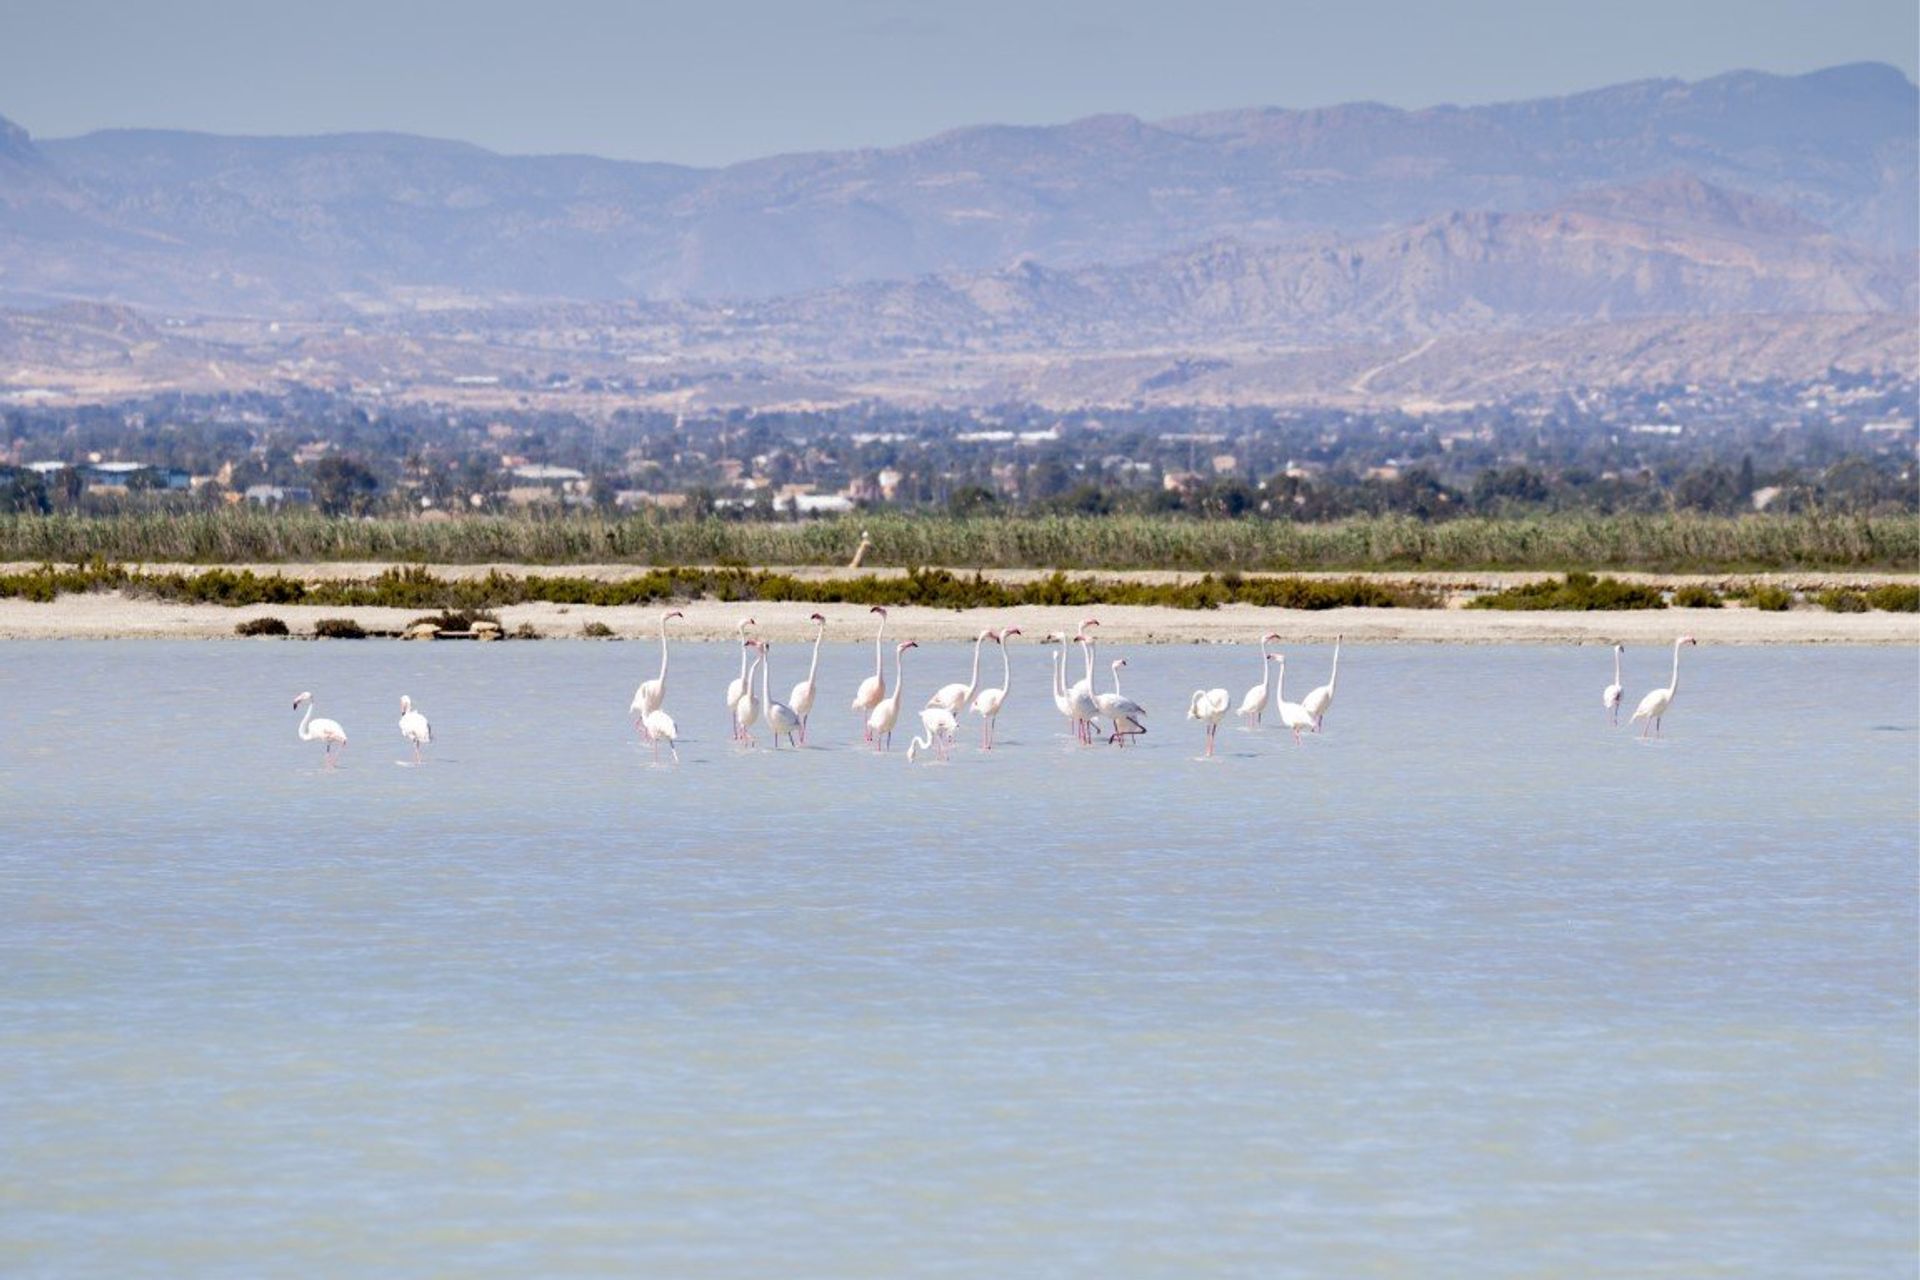 Santa Pola's salt lakes and bird reserve are a must-see for nature lovers